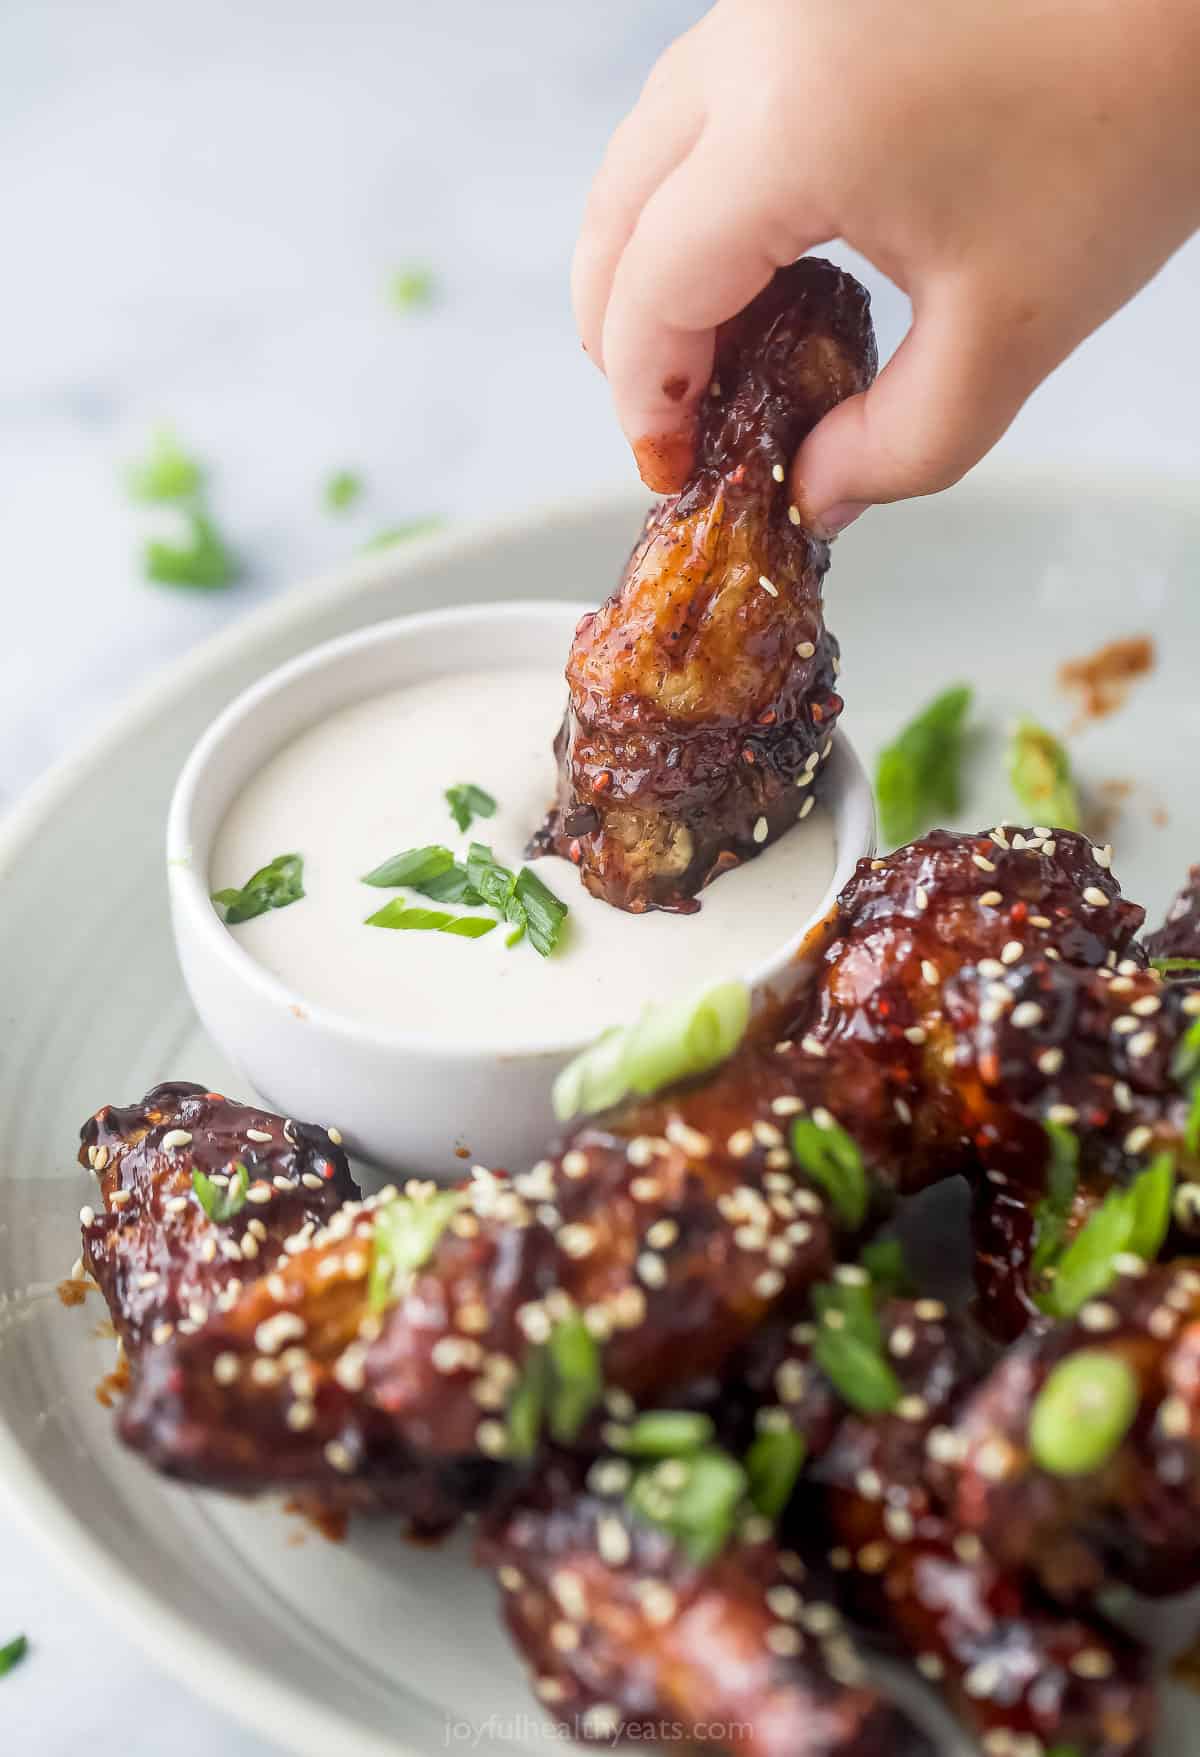 asian chicken wing being dunked into ranch